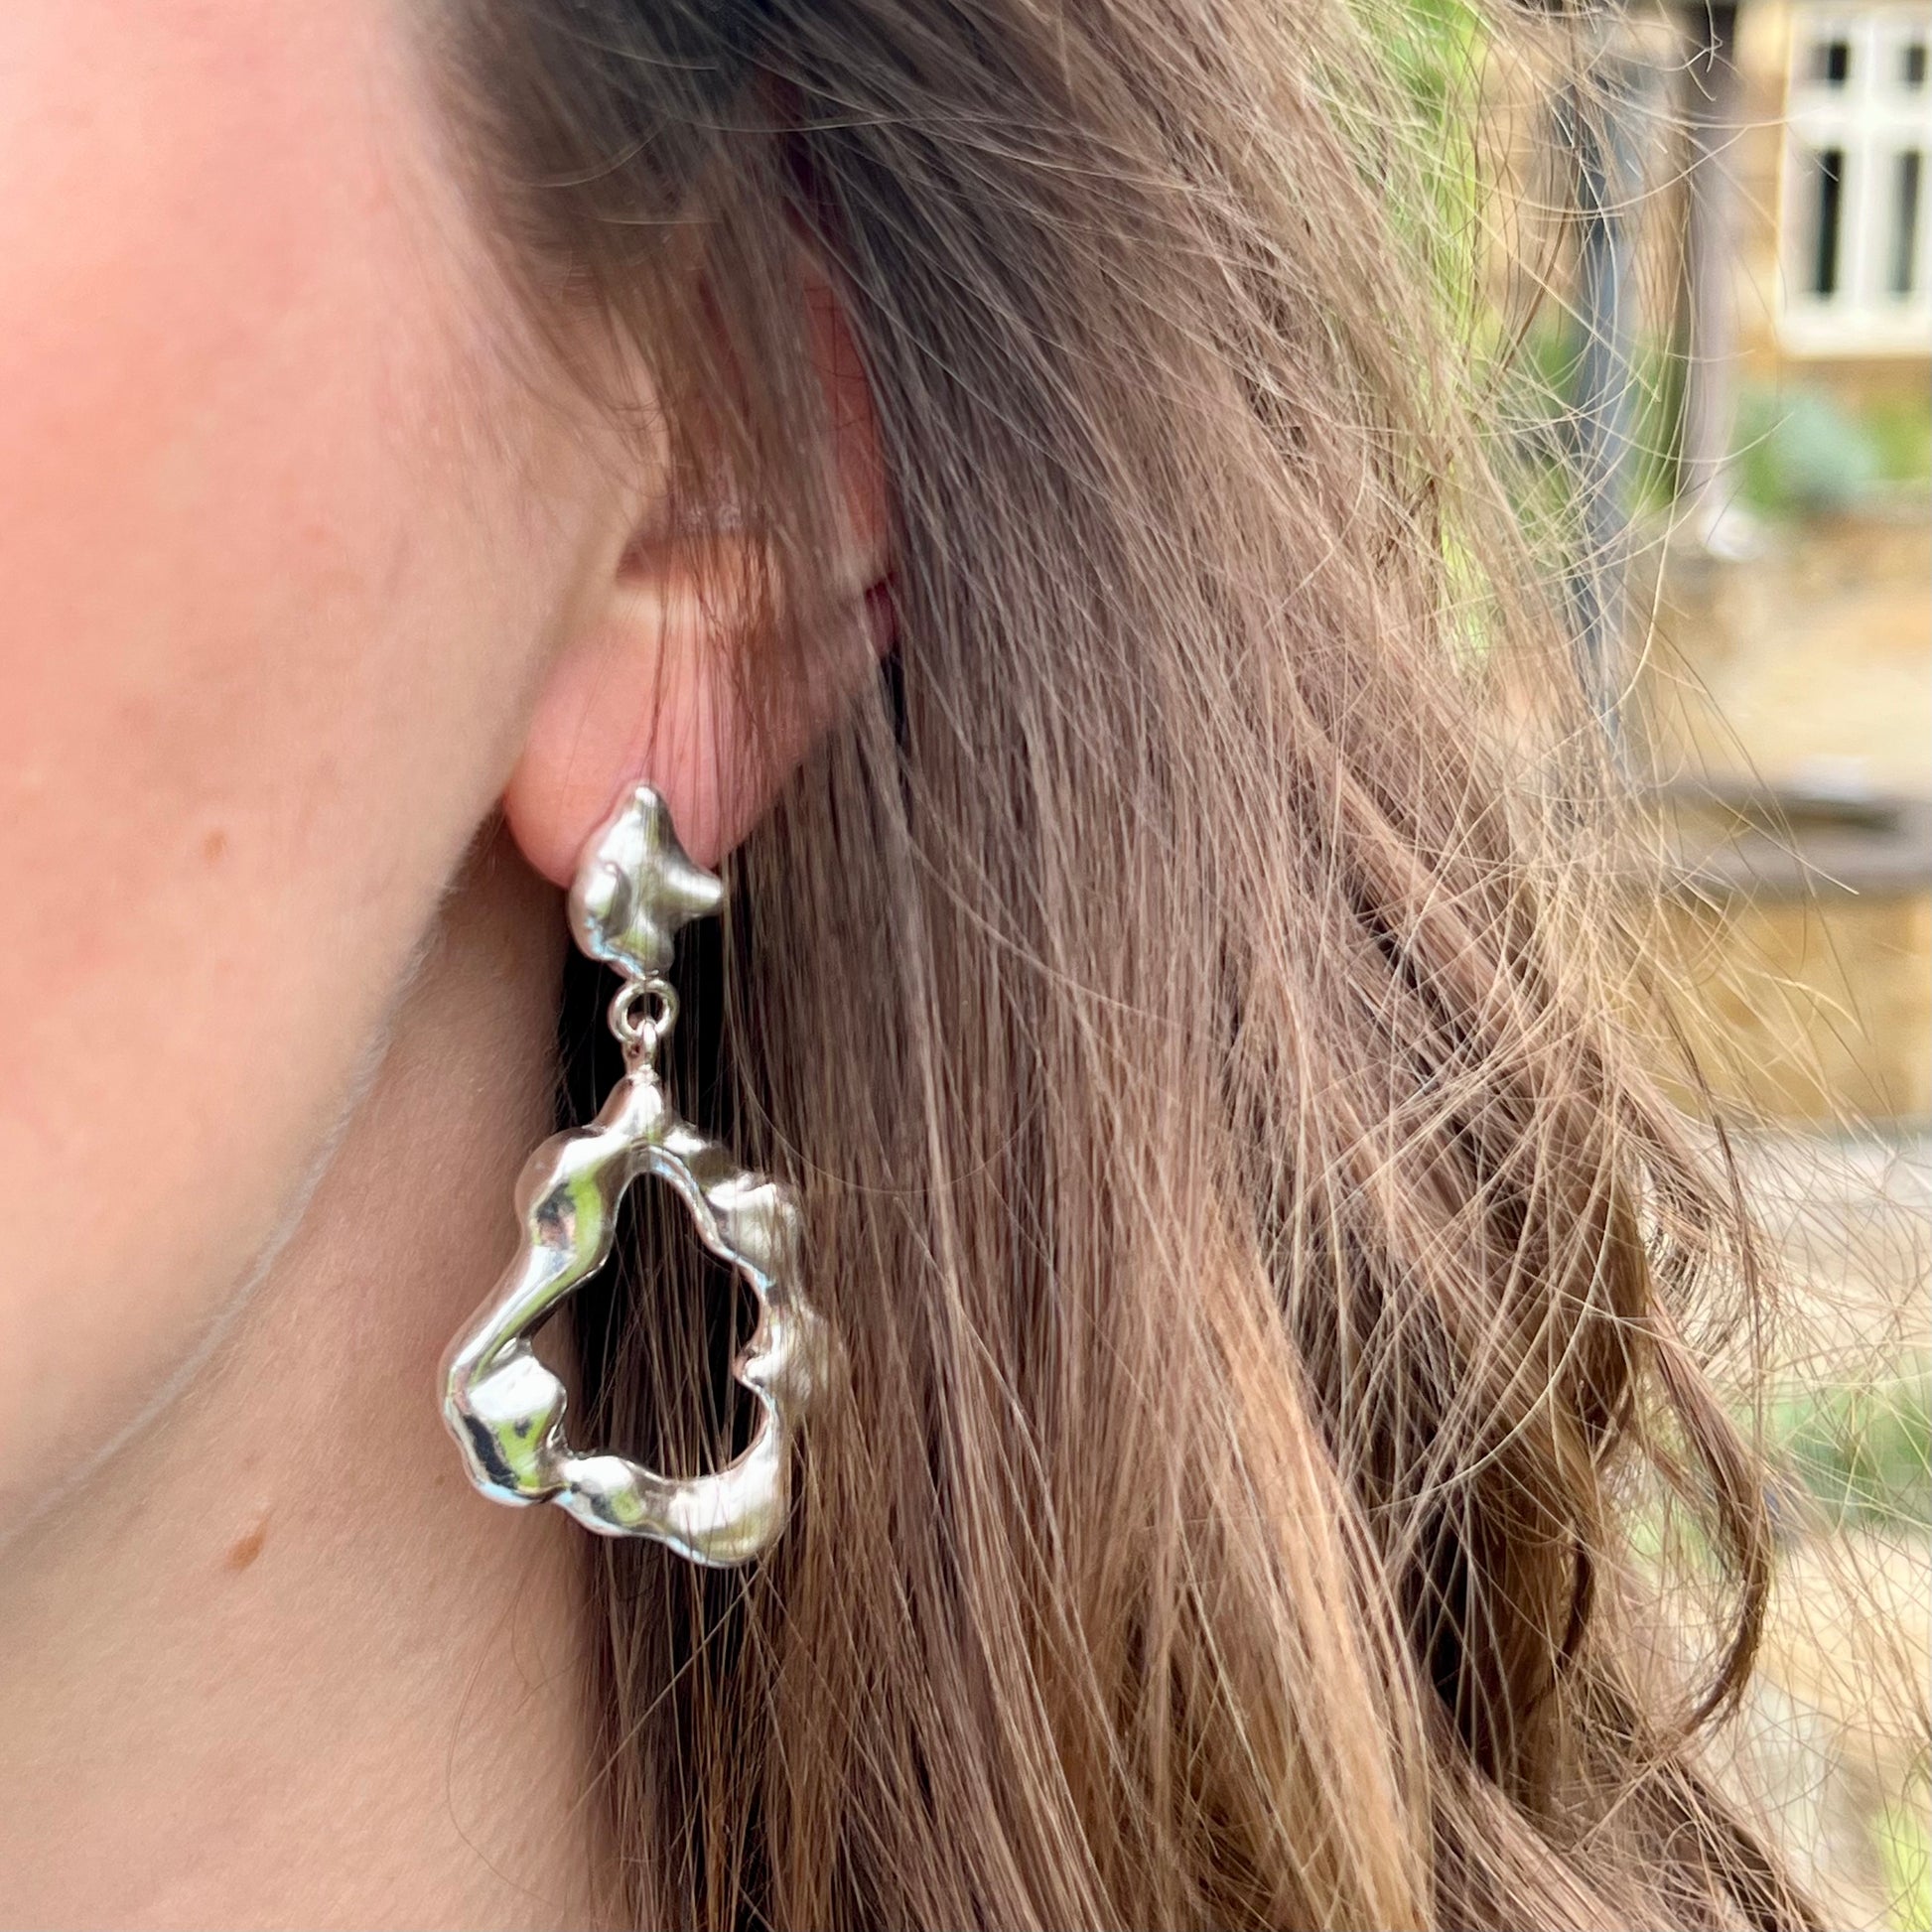 The right earring of the 'Drift earrings' photographed on a woman with long brown hair.